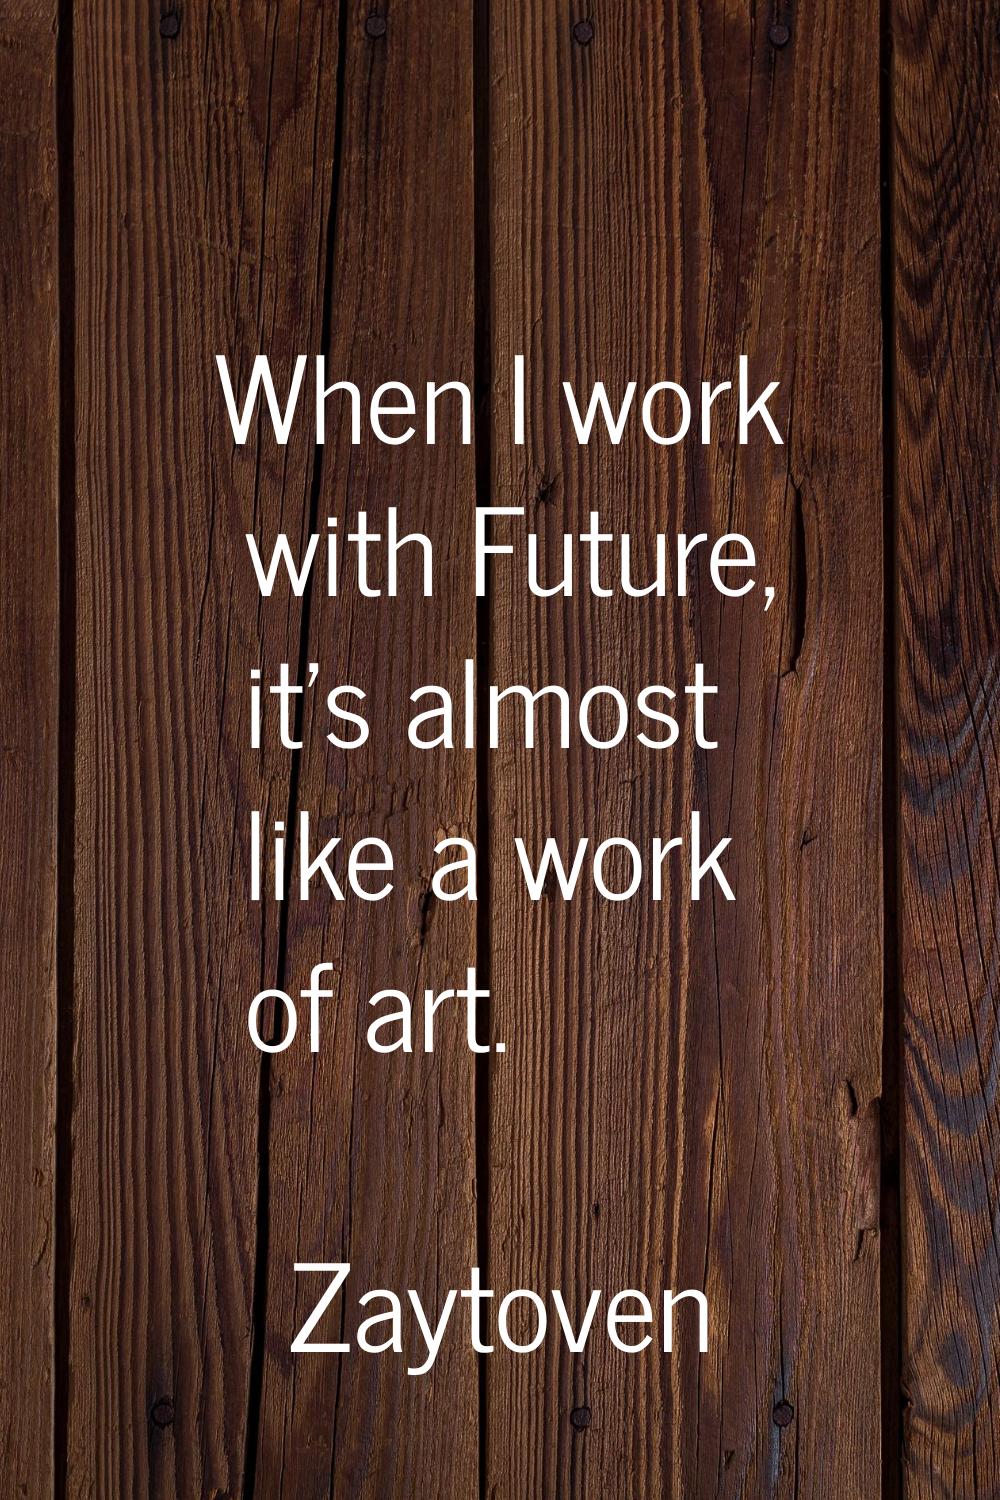 When I work with Future, it's almost like a work of art.